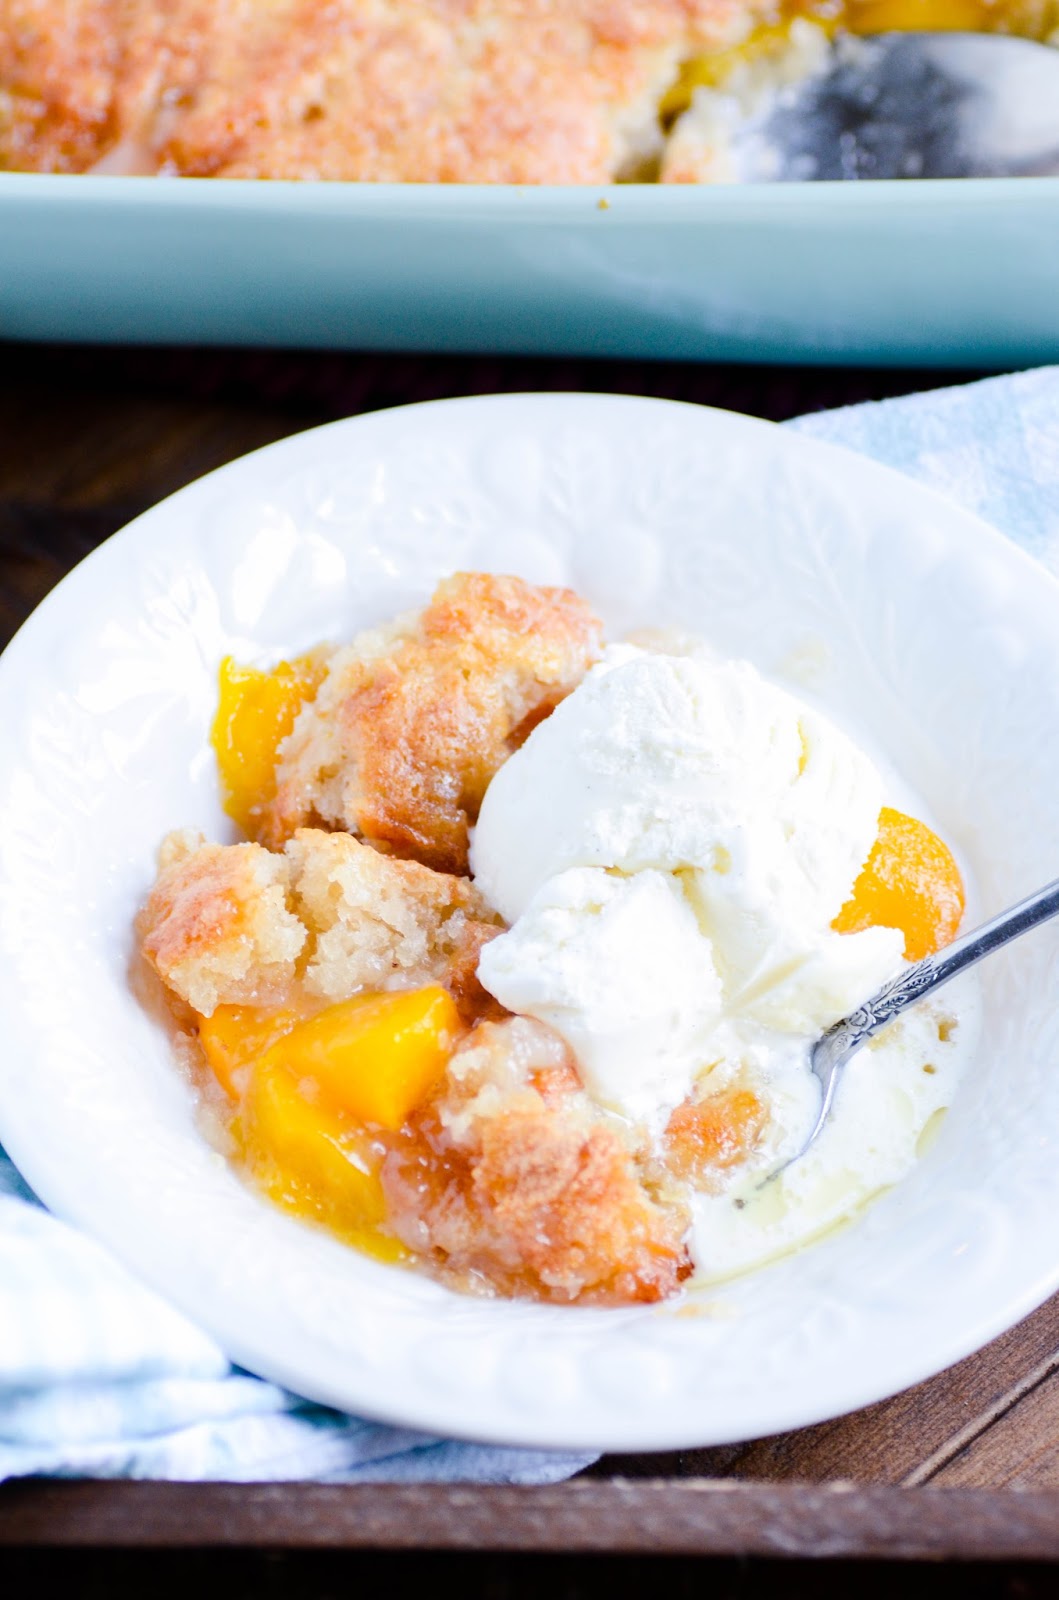 Quick and easy peach cobbler. The perfect recipe to stretch out those summer days a little bit longer!